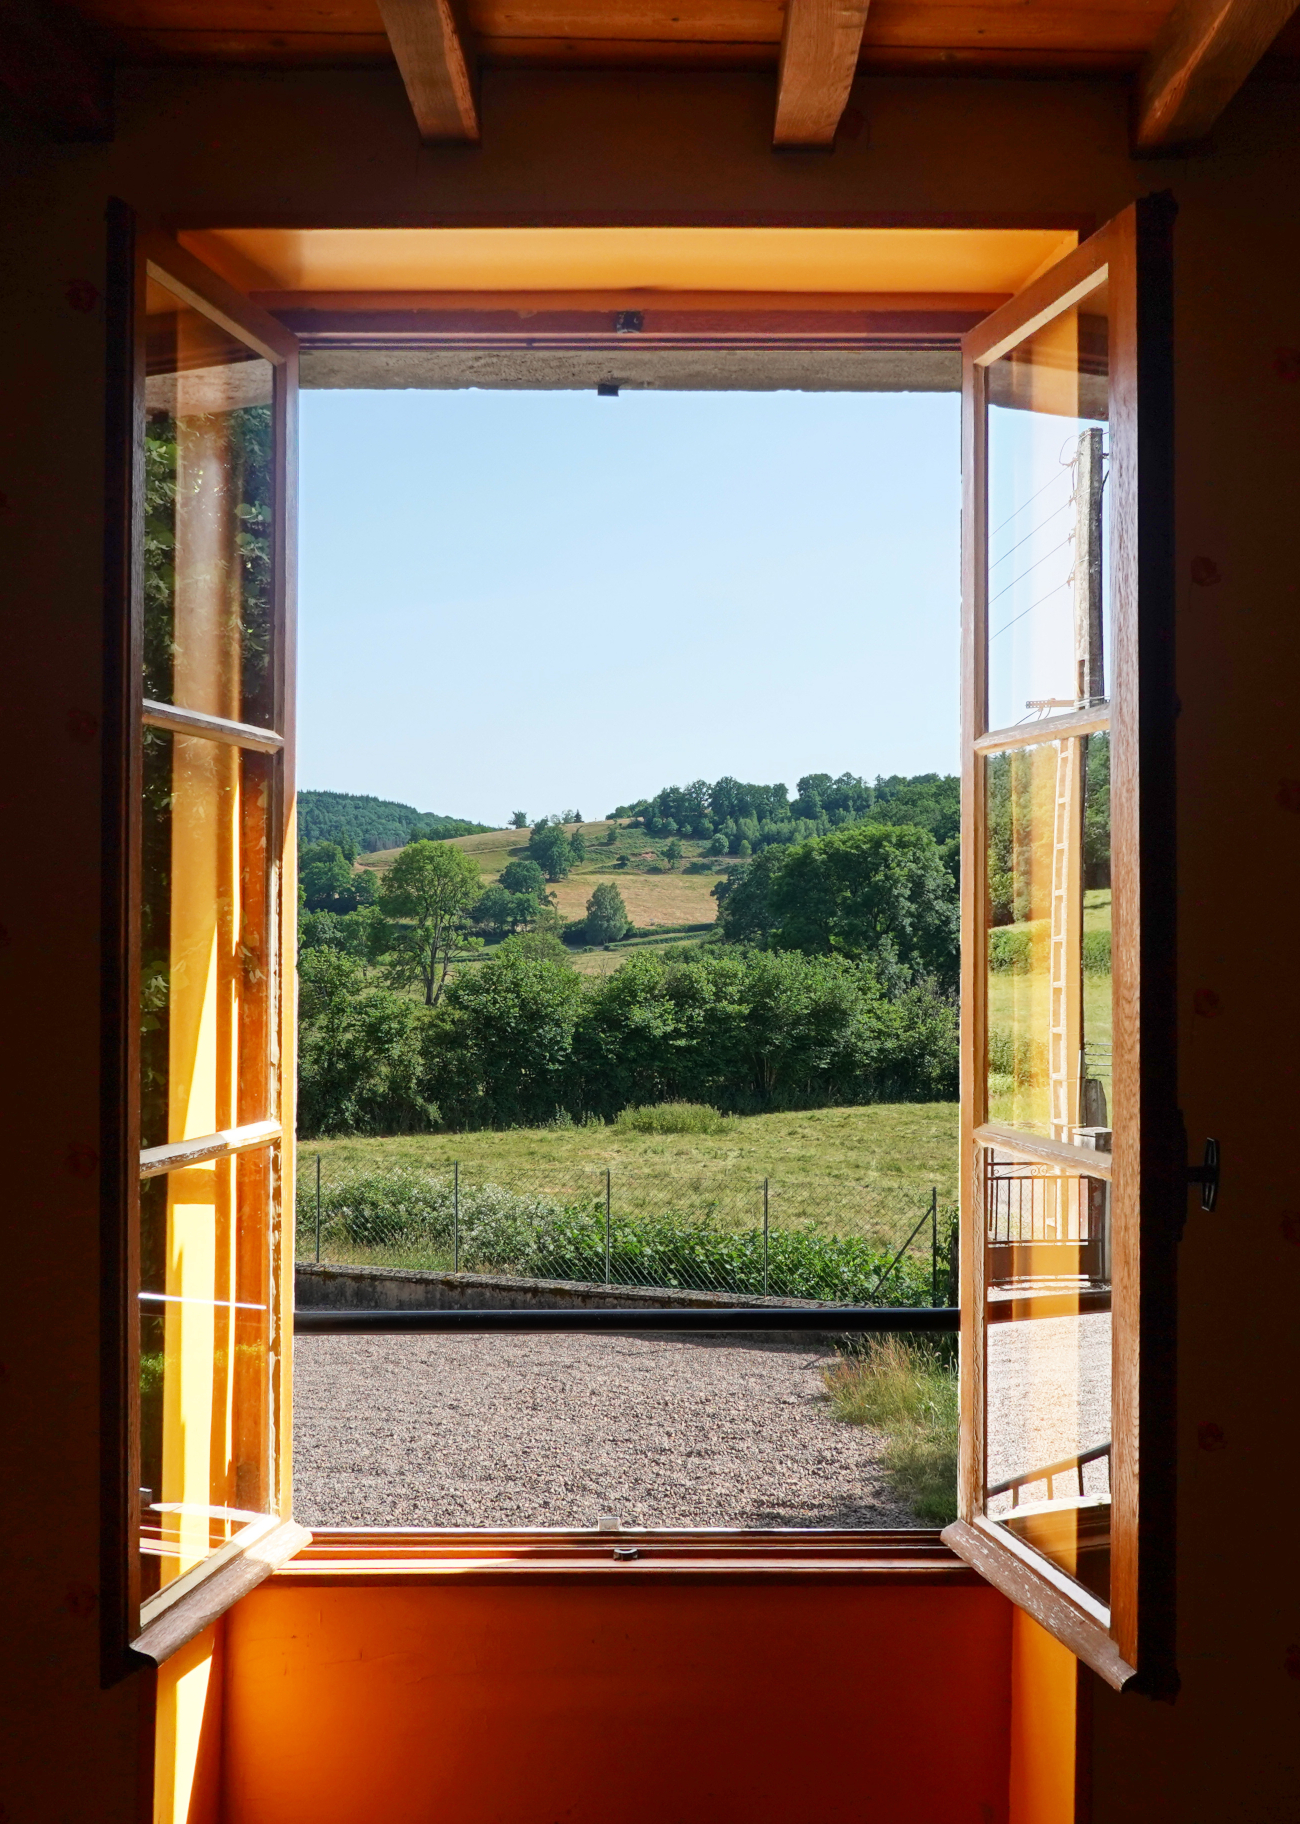 View from the living room window - Les Meulots, Blanot, Morvan nature park